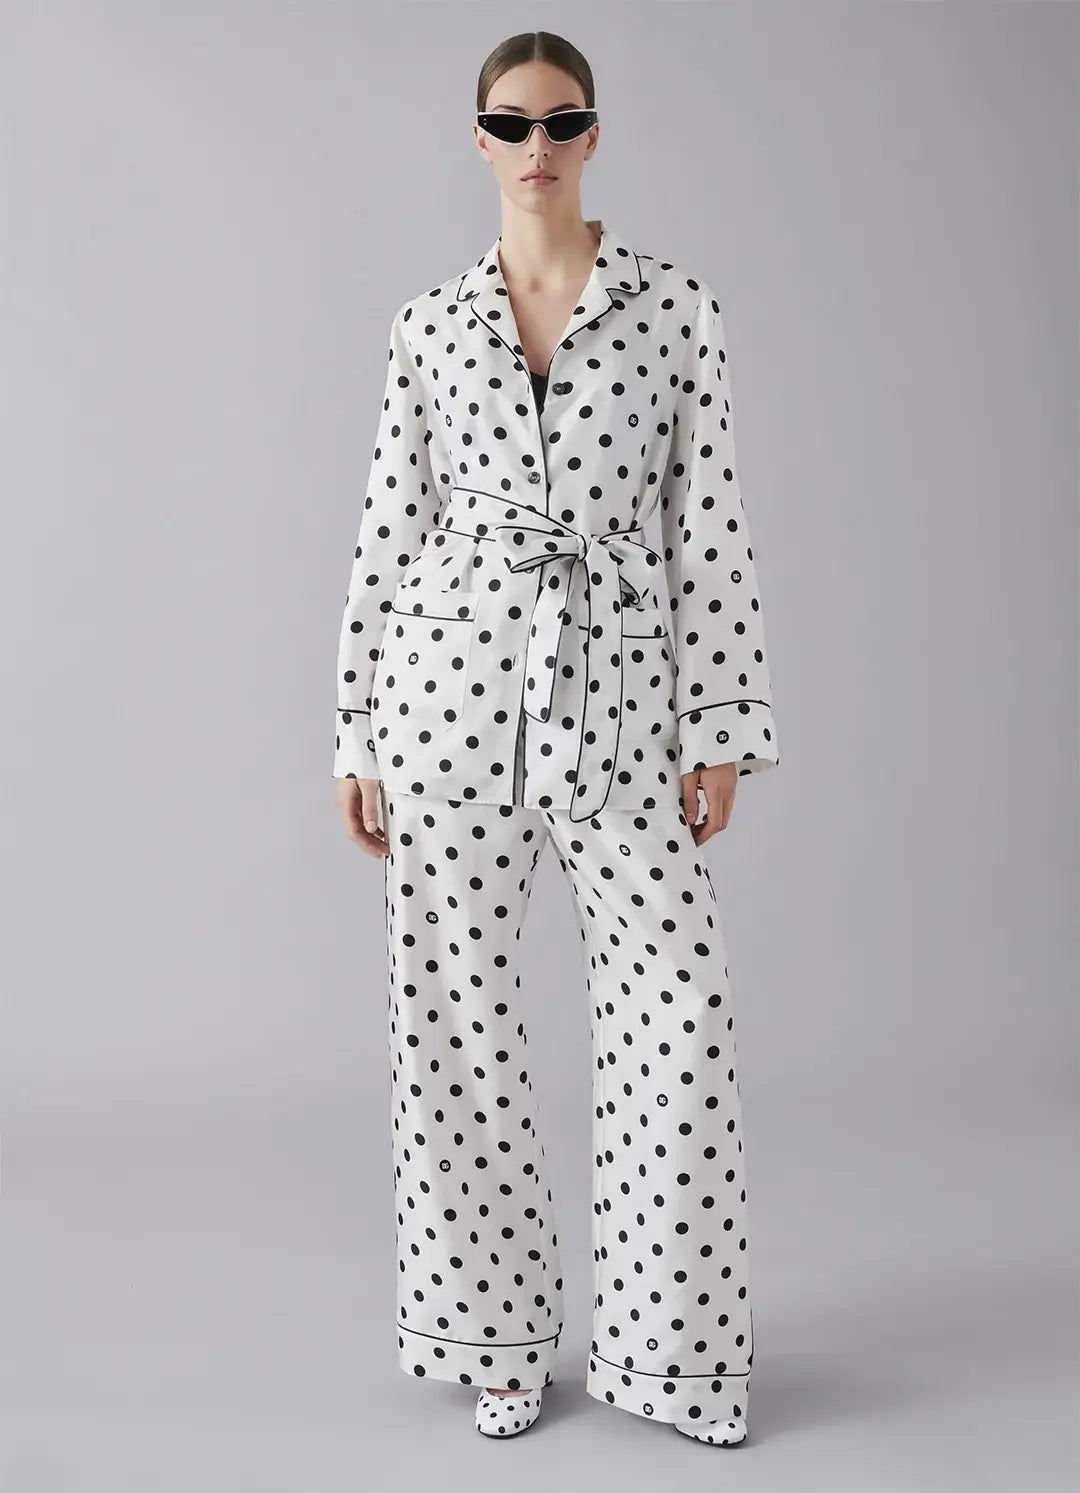 The polka dot, with its timeless charm